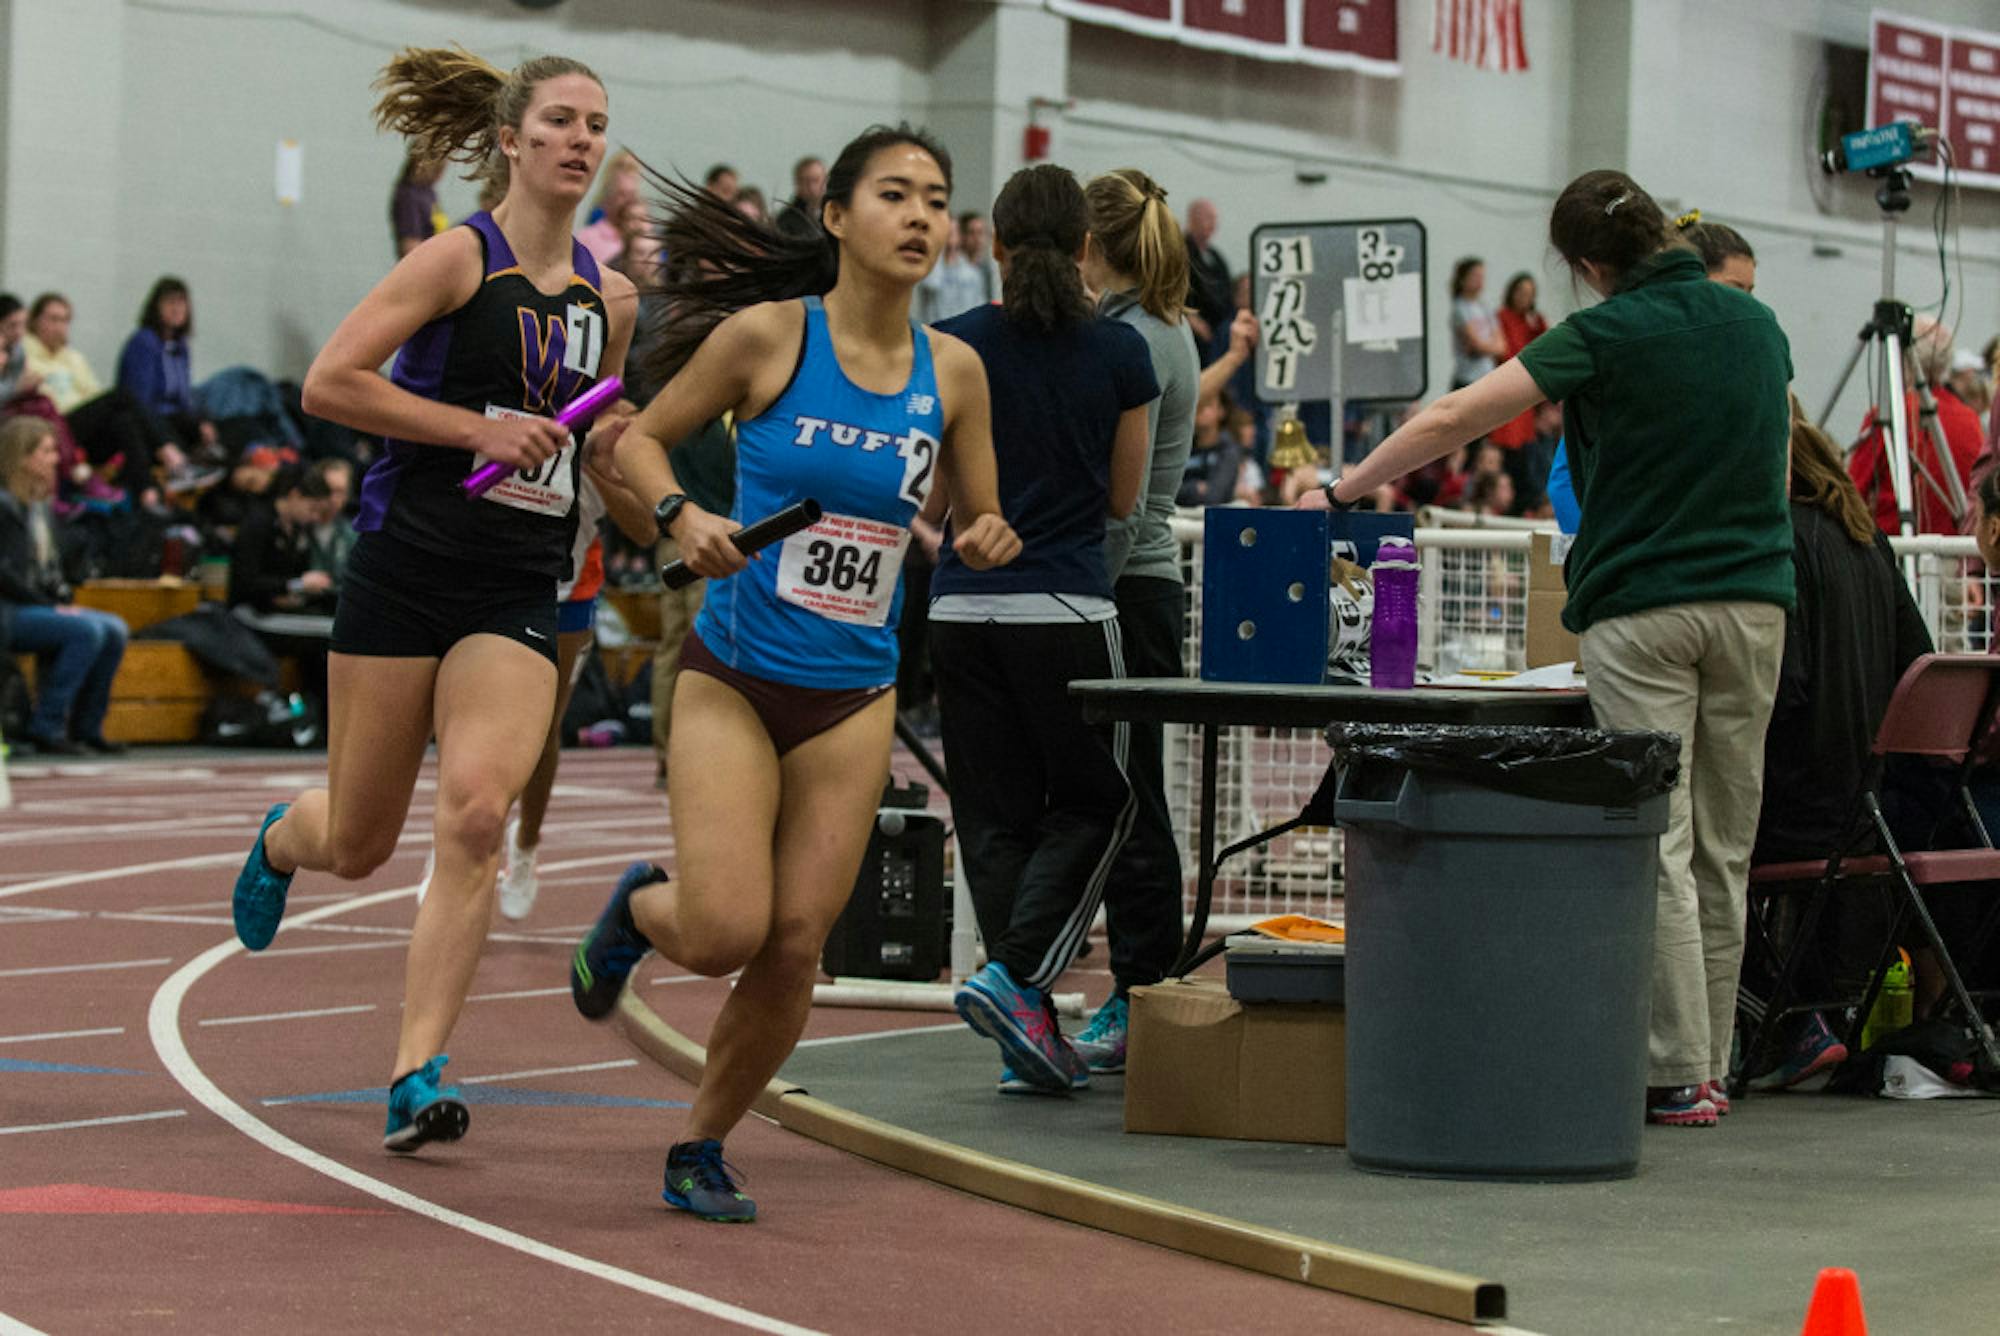 2017-02-18-Womens-Track-and-Field-at-MIT-028